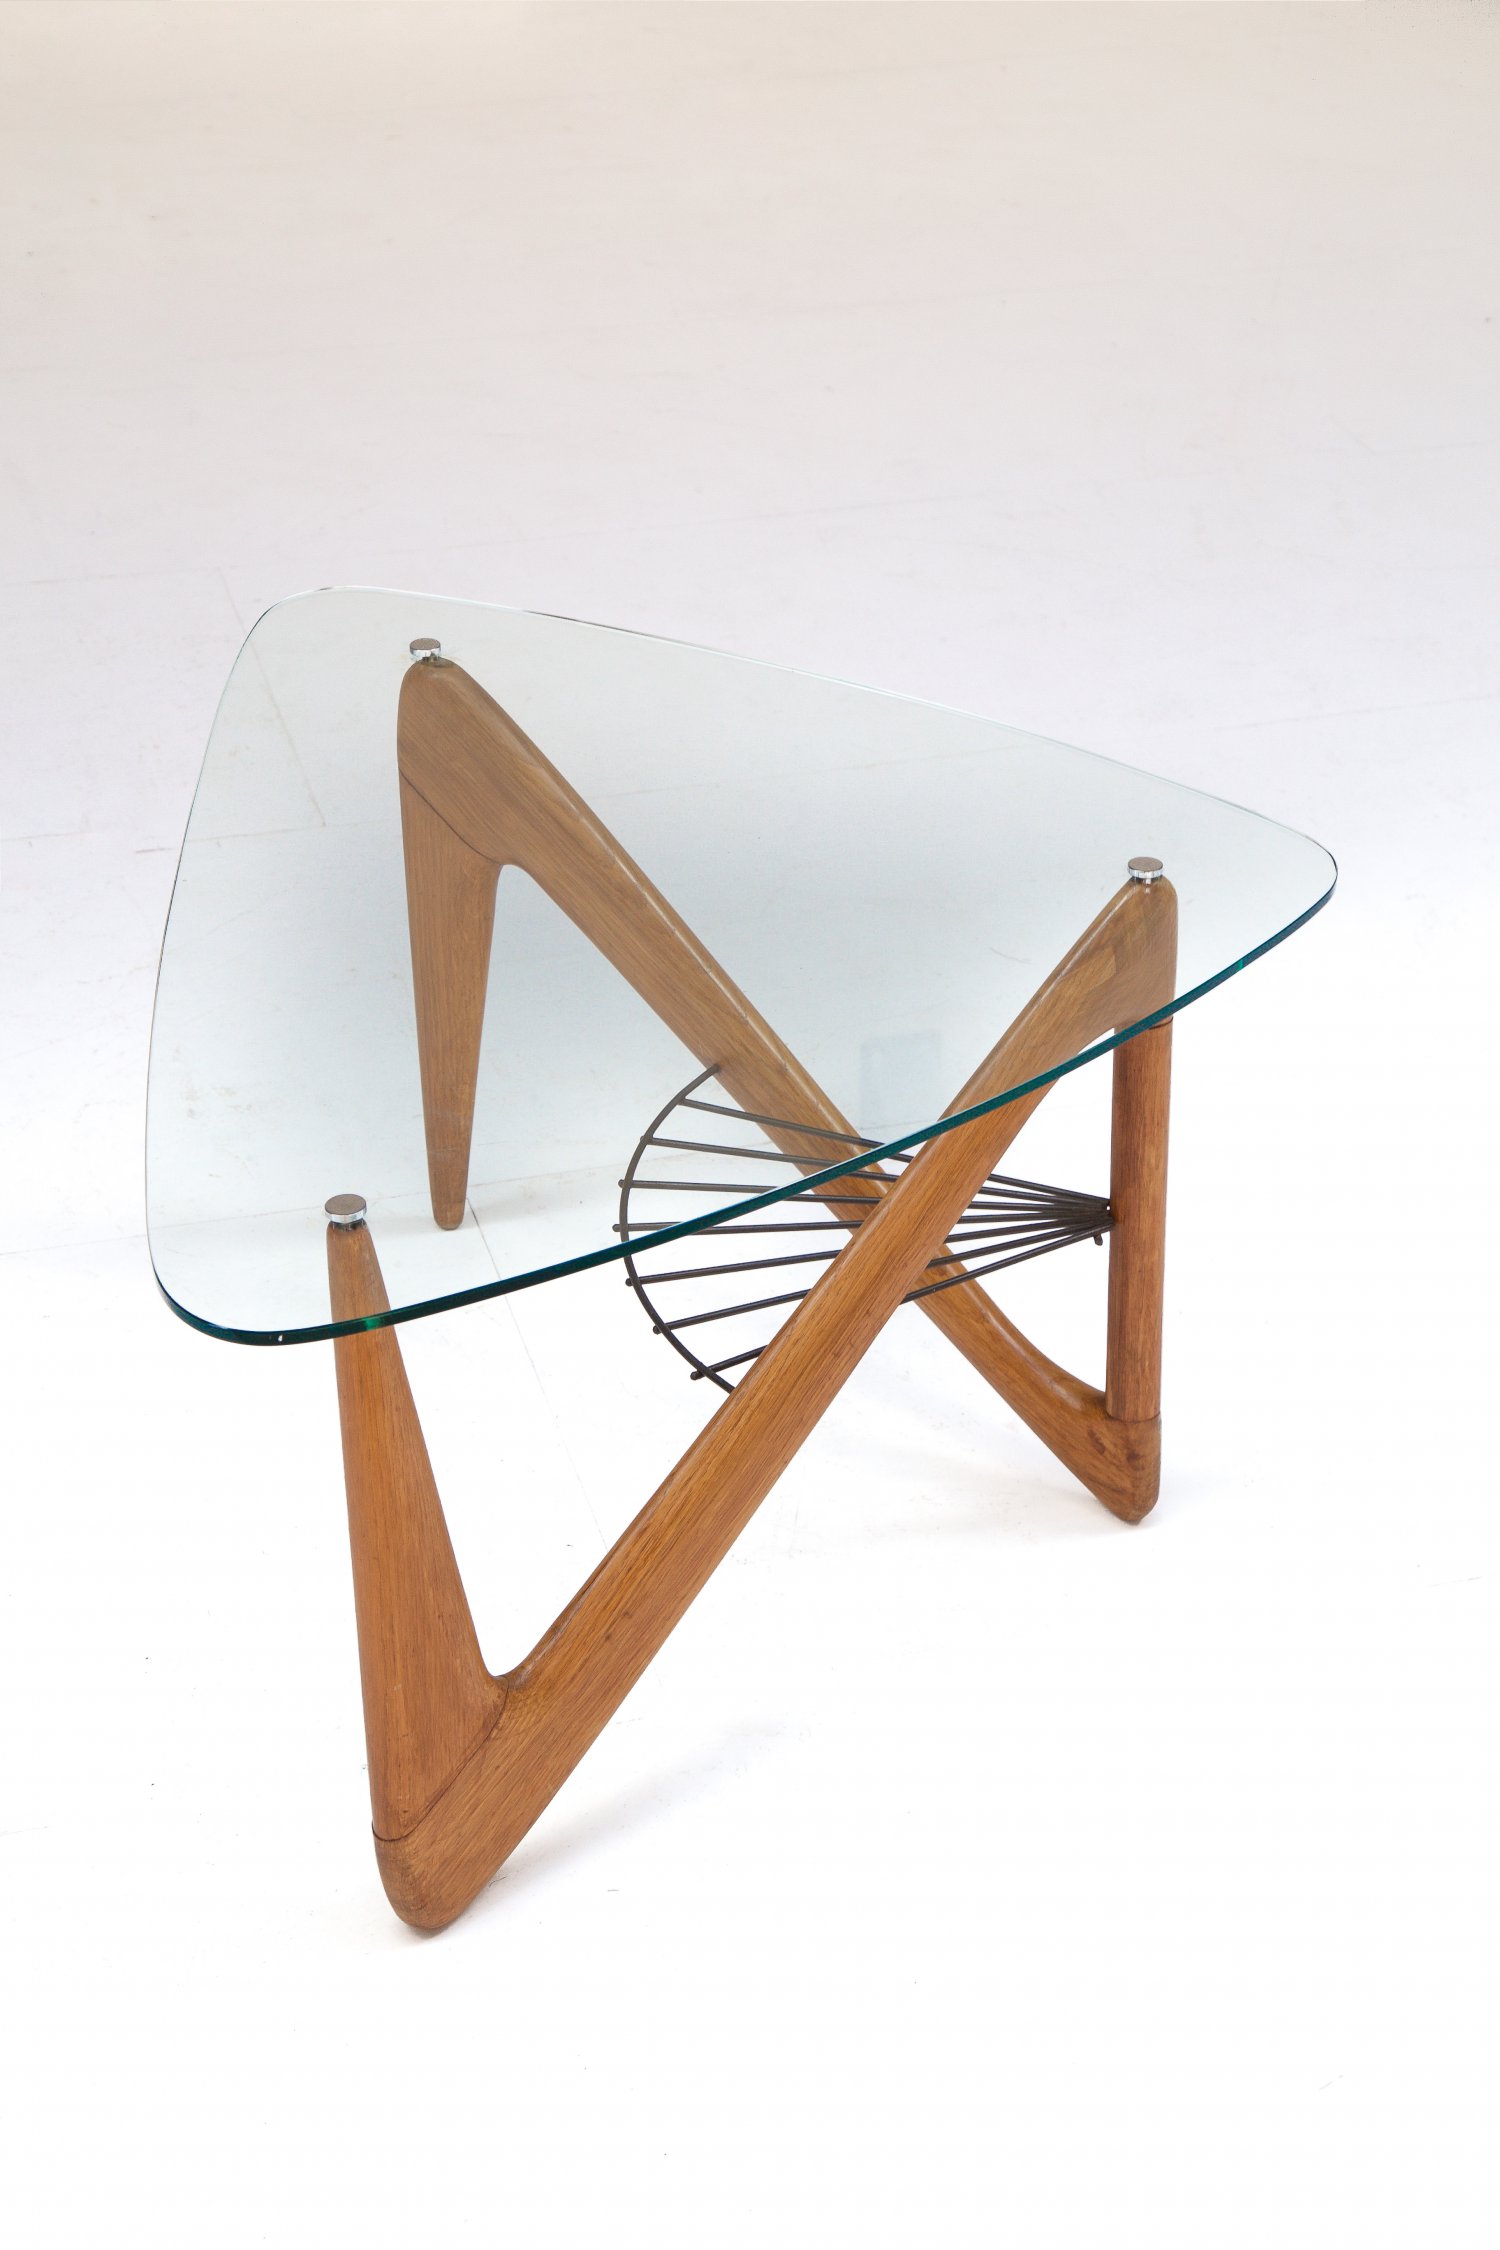 Louis Sognot coffee table